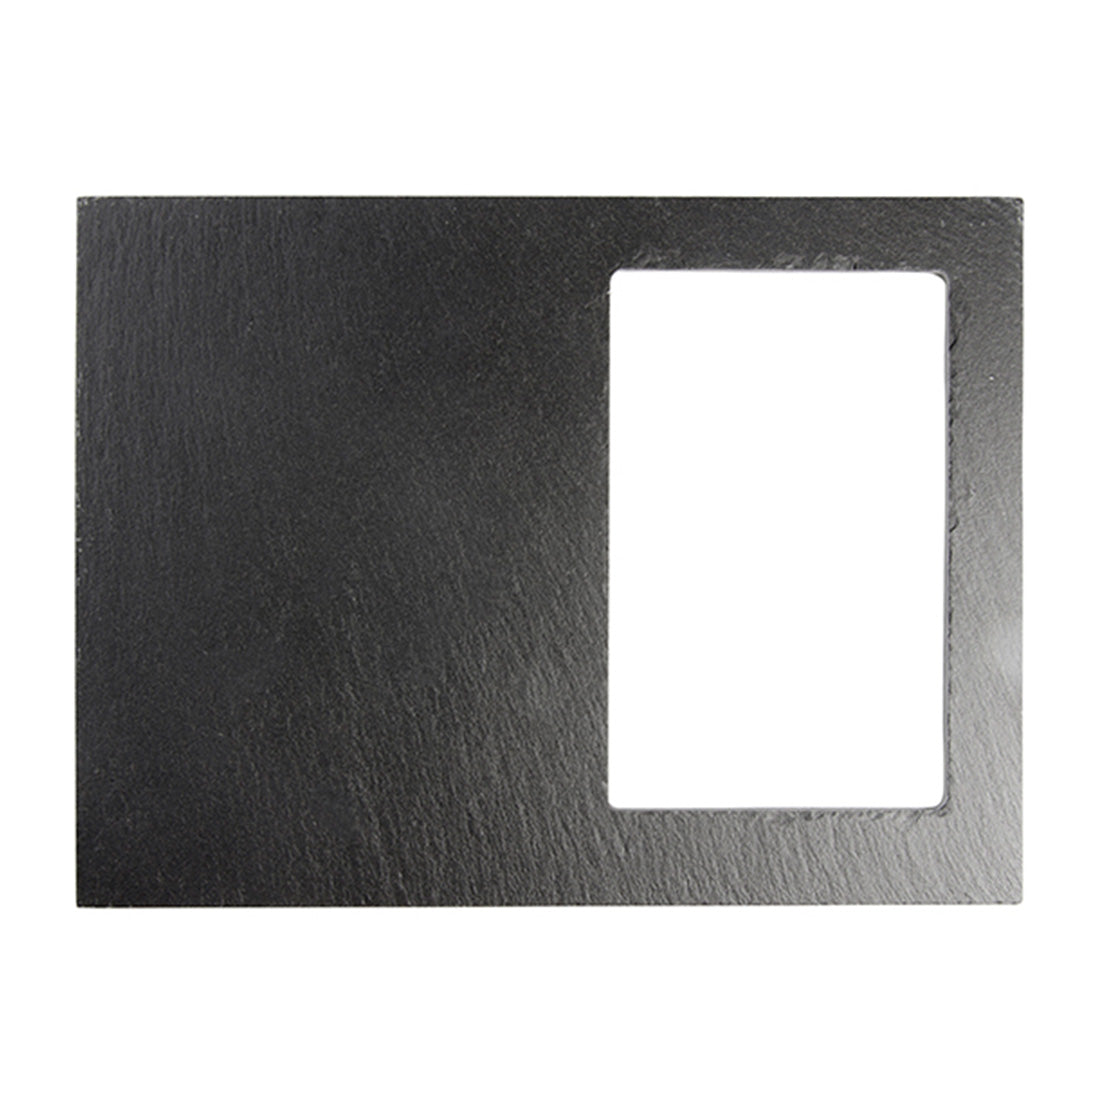 Engravable Slate Frame 25x19cm - Pack of 4 - Joto Imaging Supplies Canada